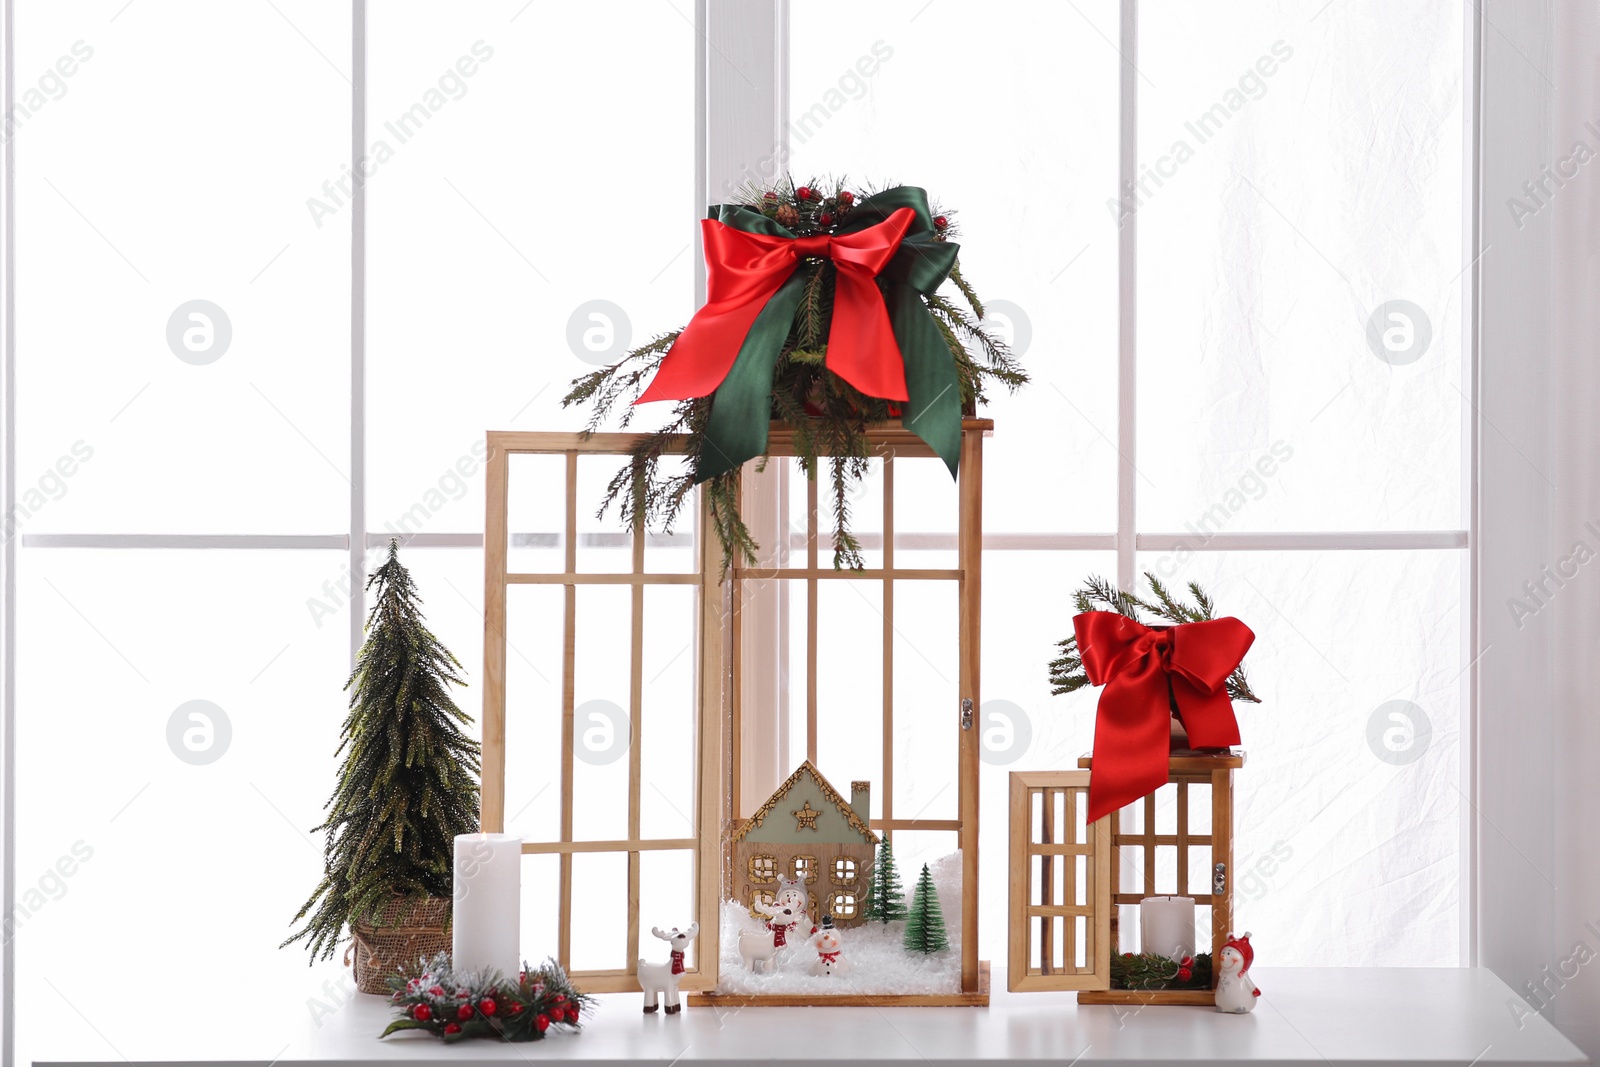 Photo of Vintage wooden lanterns with beautiful Christmas decor on window sill indoors